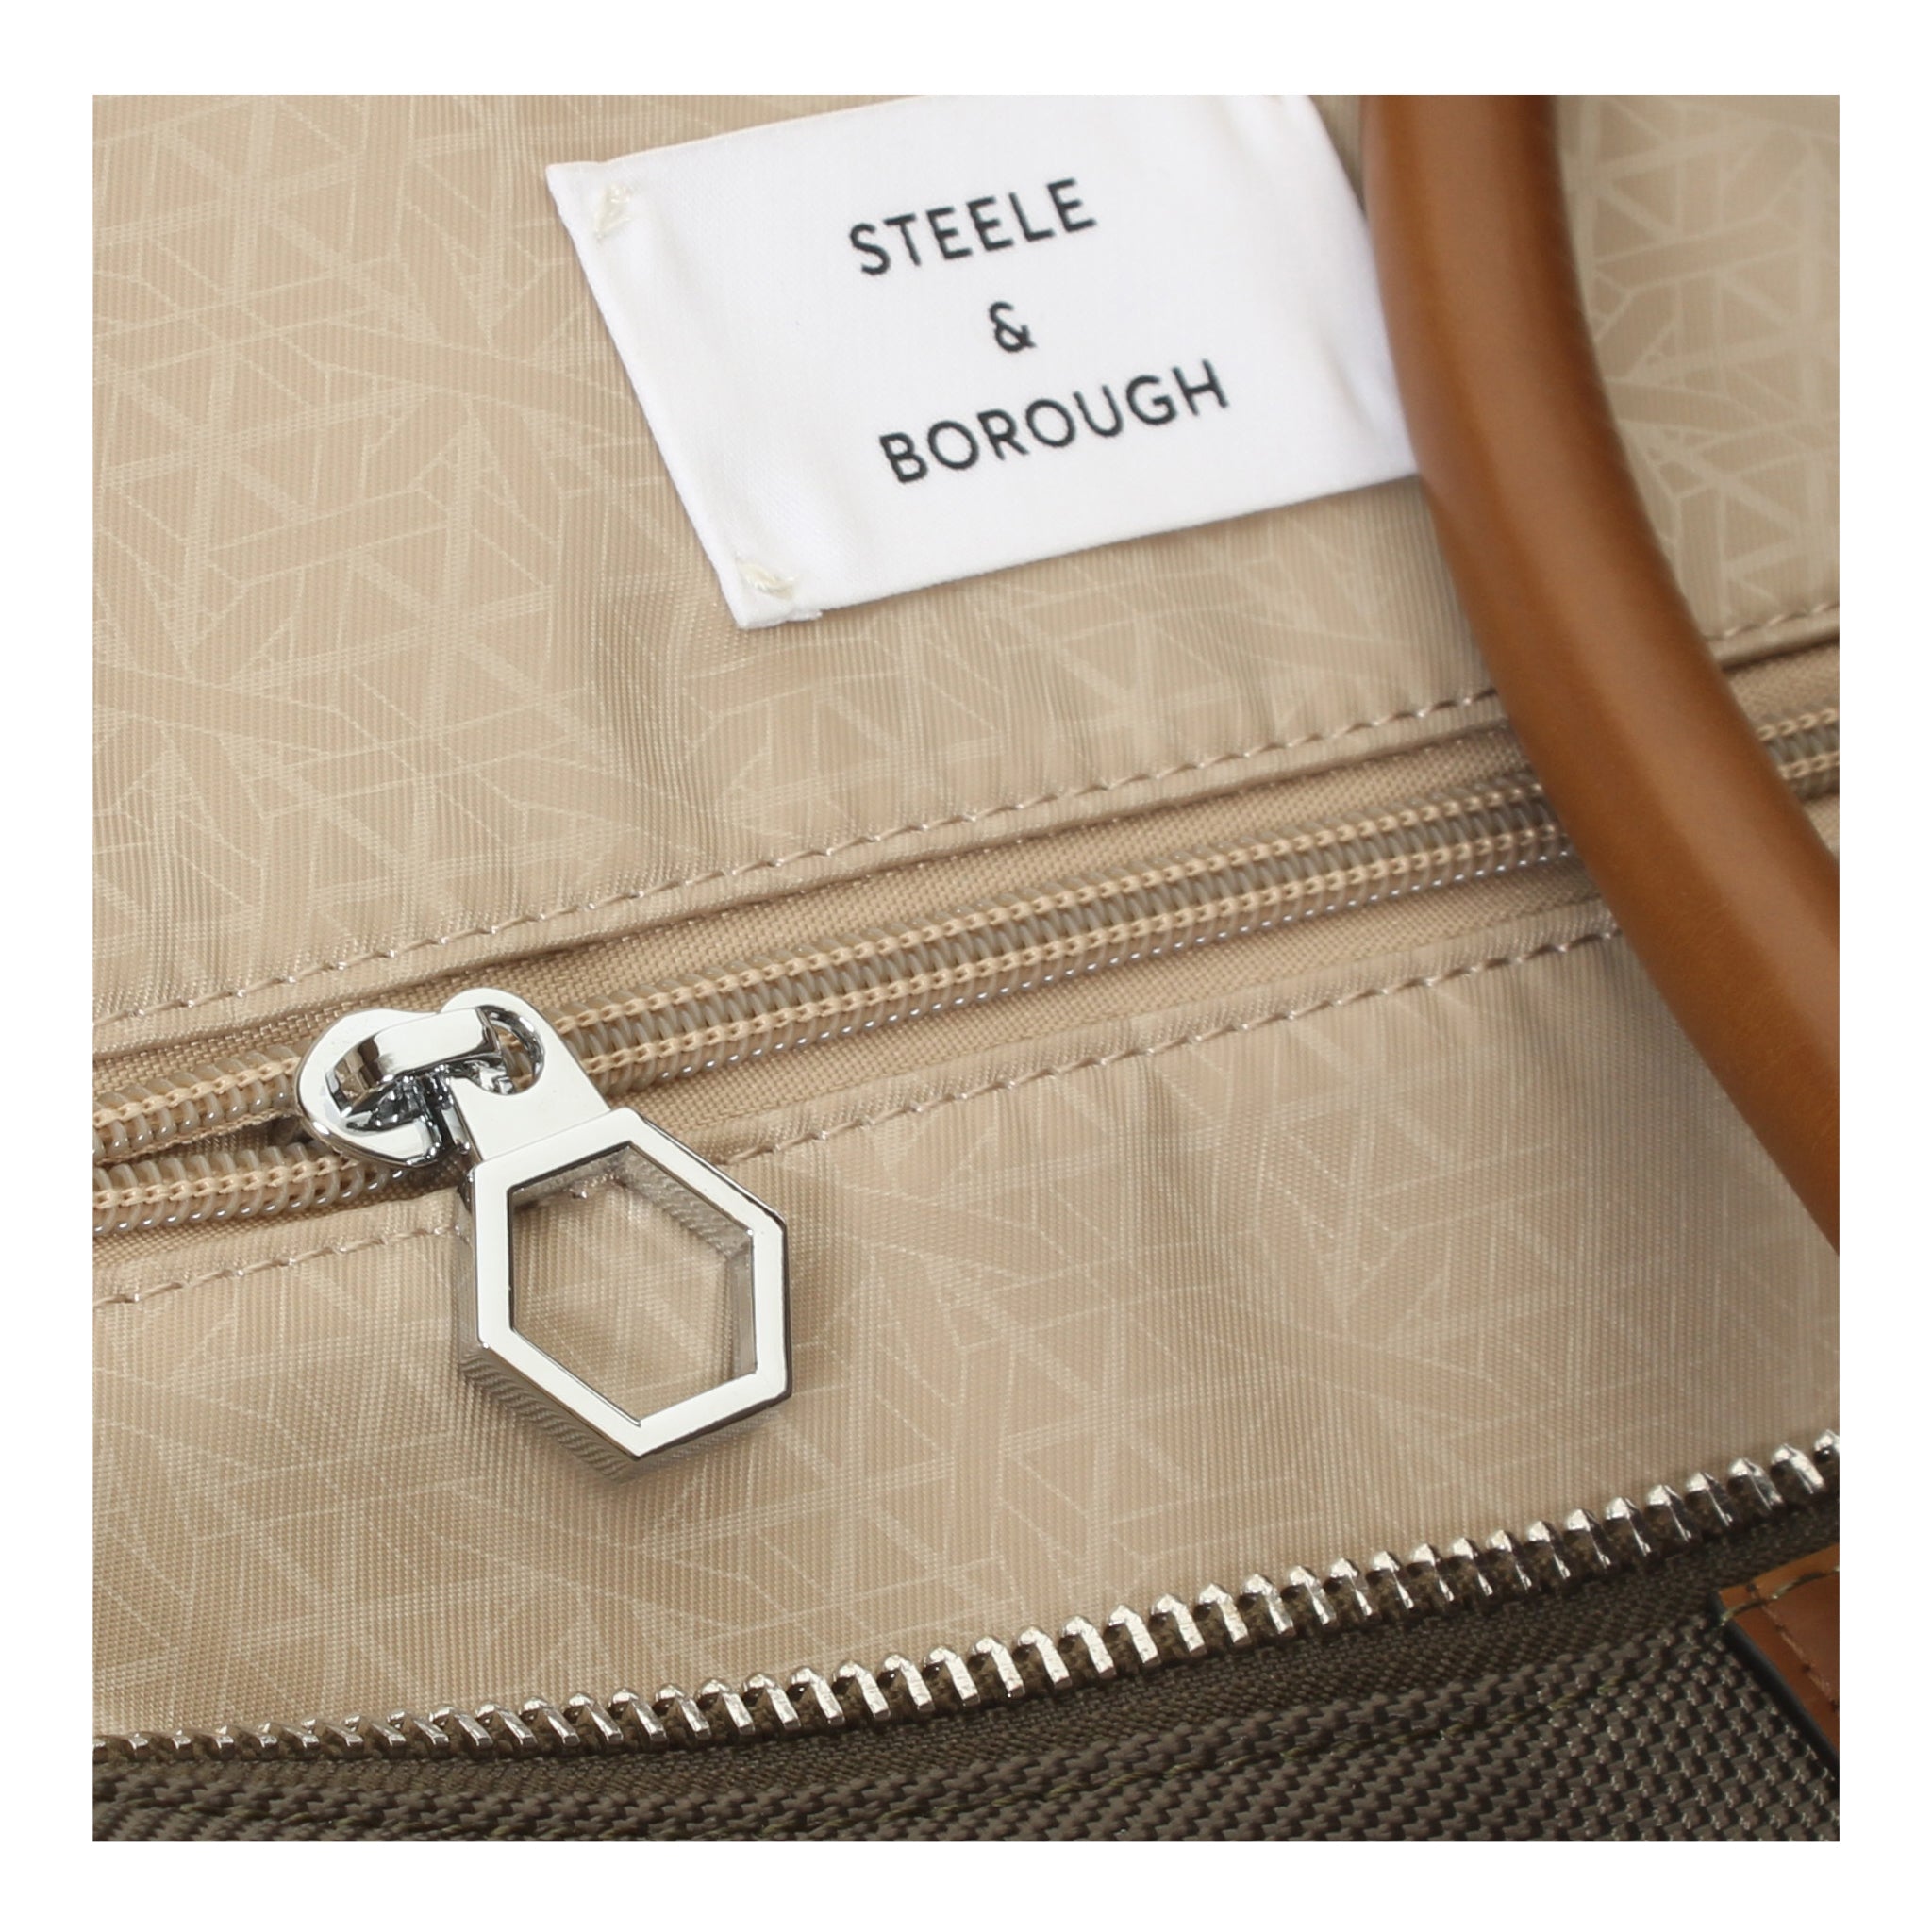 Modern Weekender Bag featuring a custom monogram combining sustainability with style.